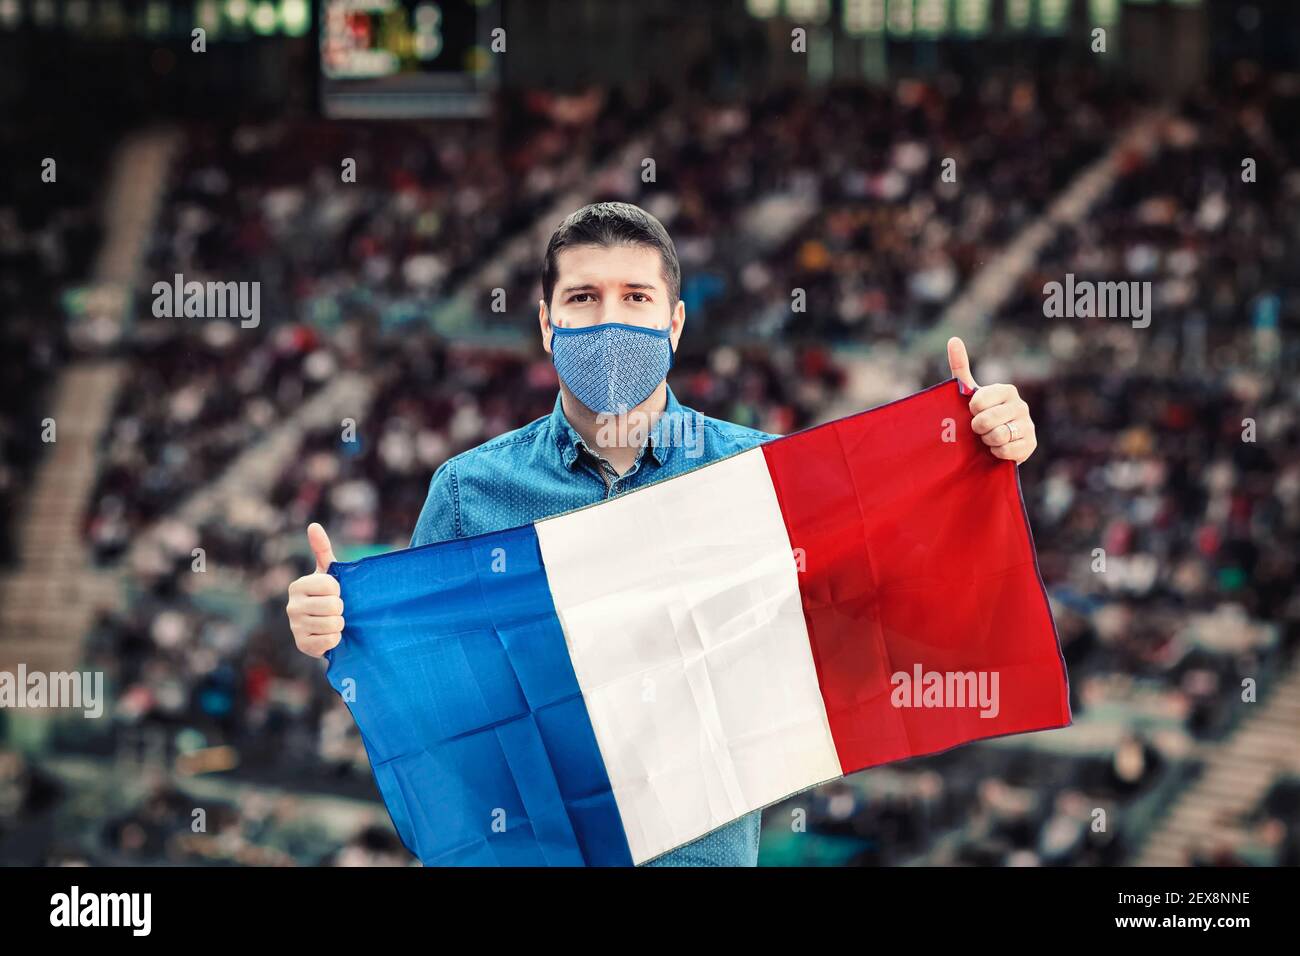 Happy supporter holding national flag of France cheering his favorite team at international sport event at stadium Stock Photo